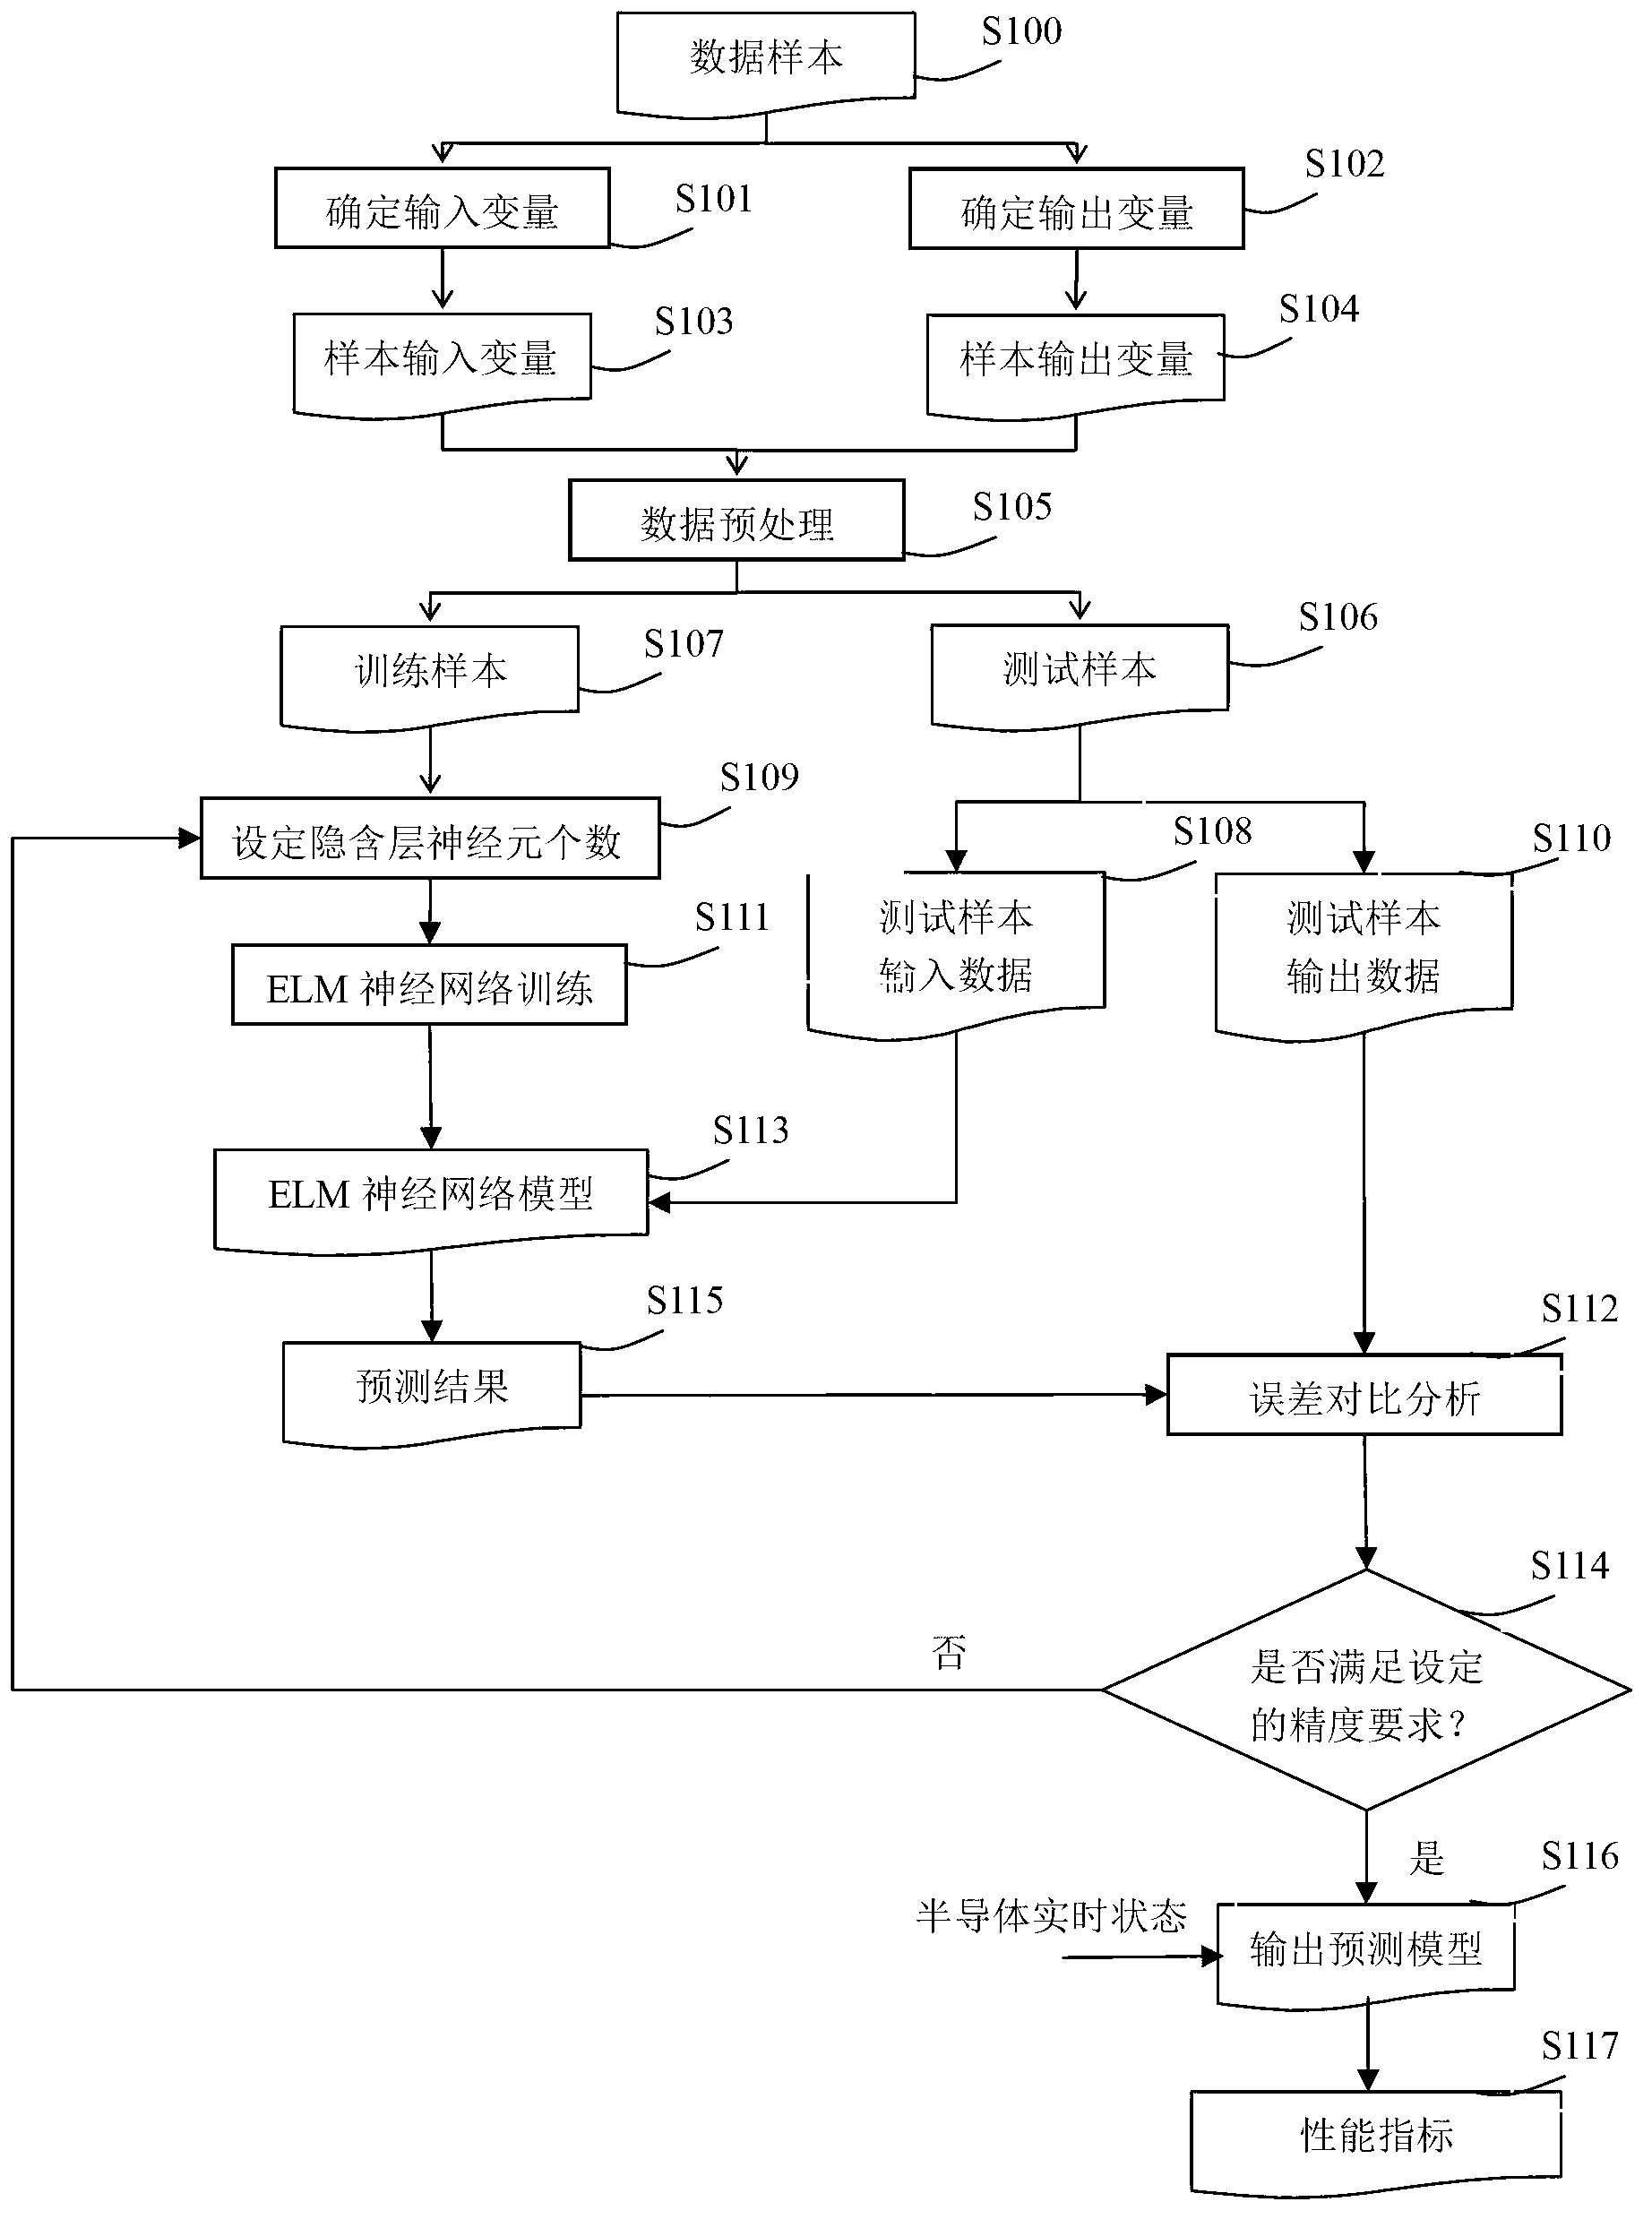 Performance prediction method applicable to dynamic scheduling for semiconductor production line